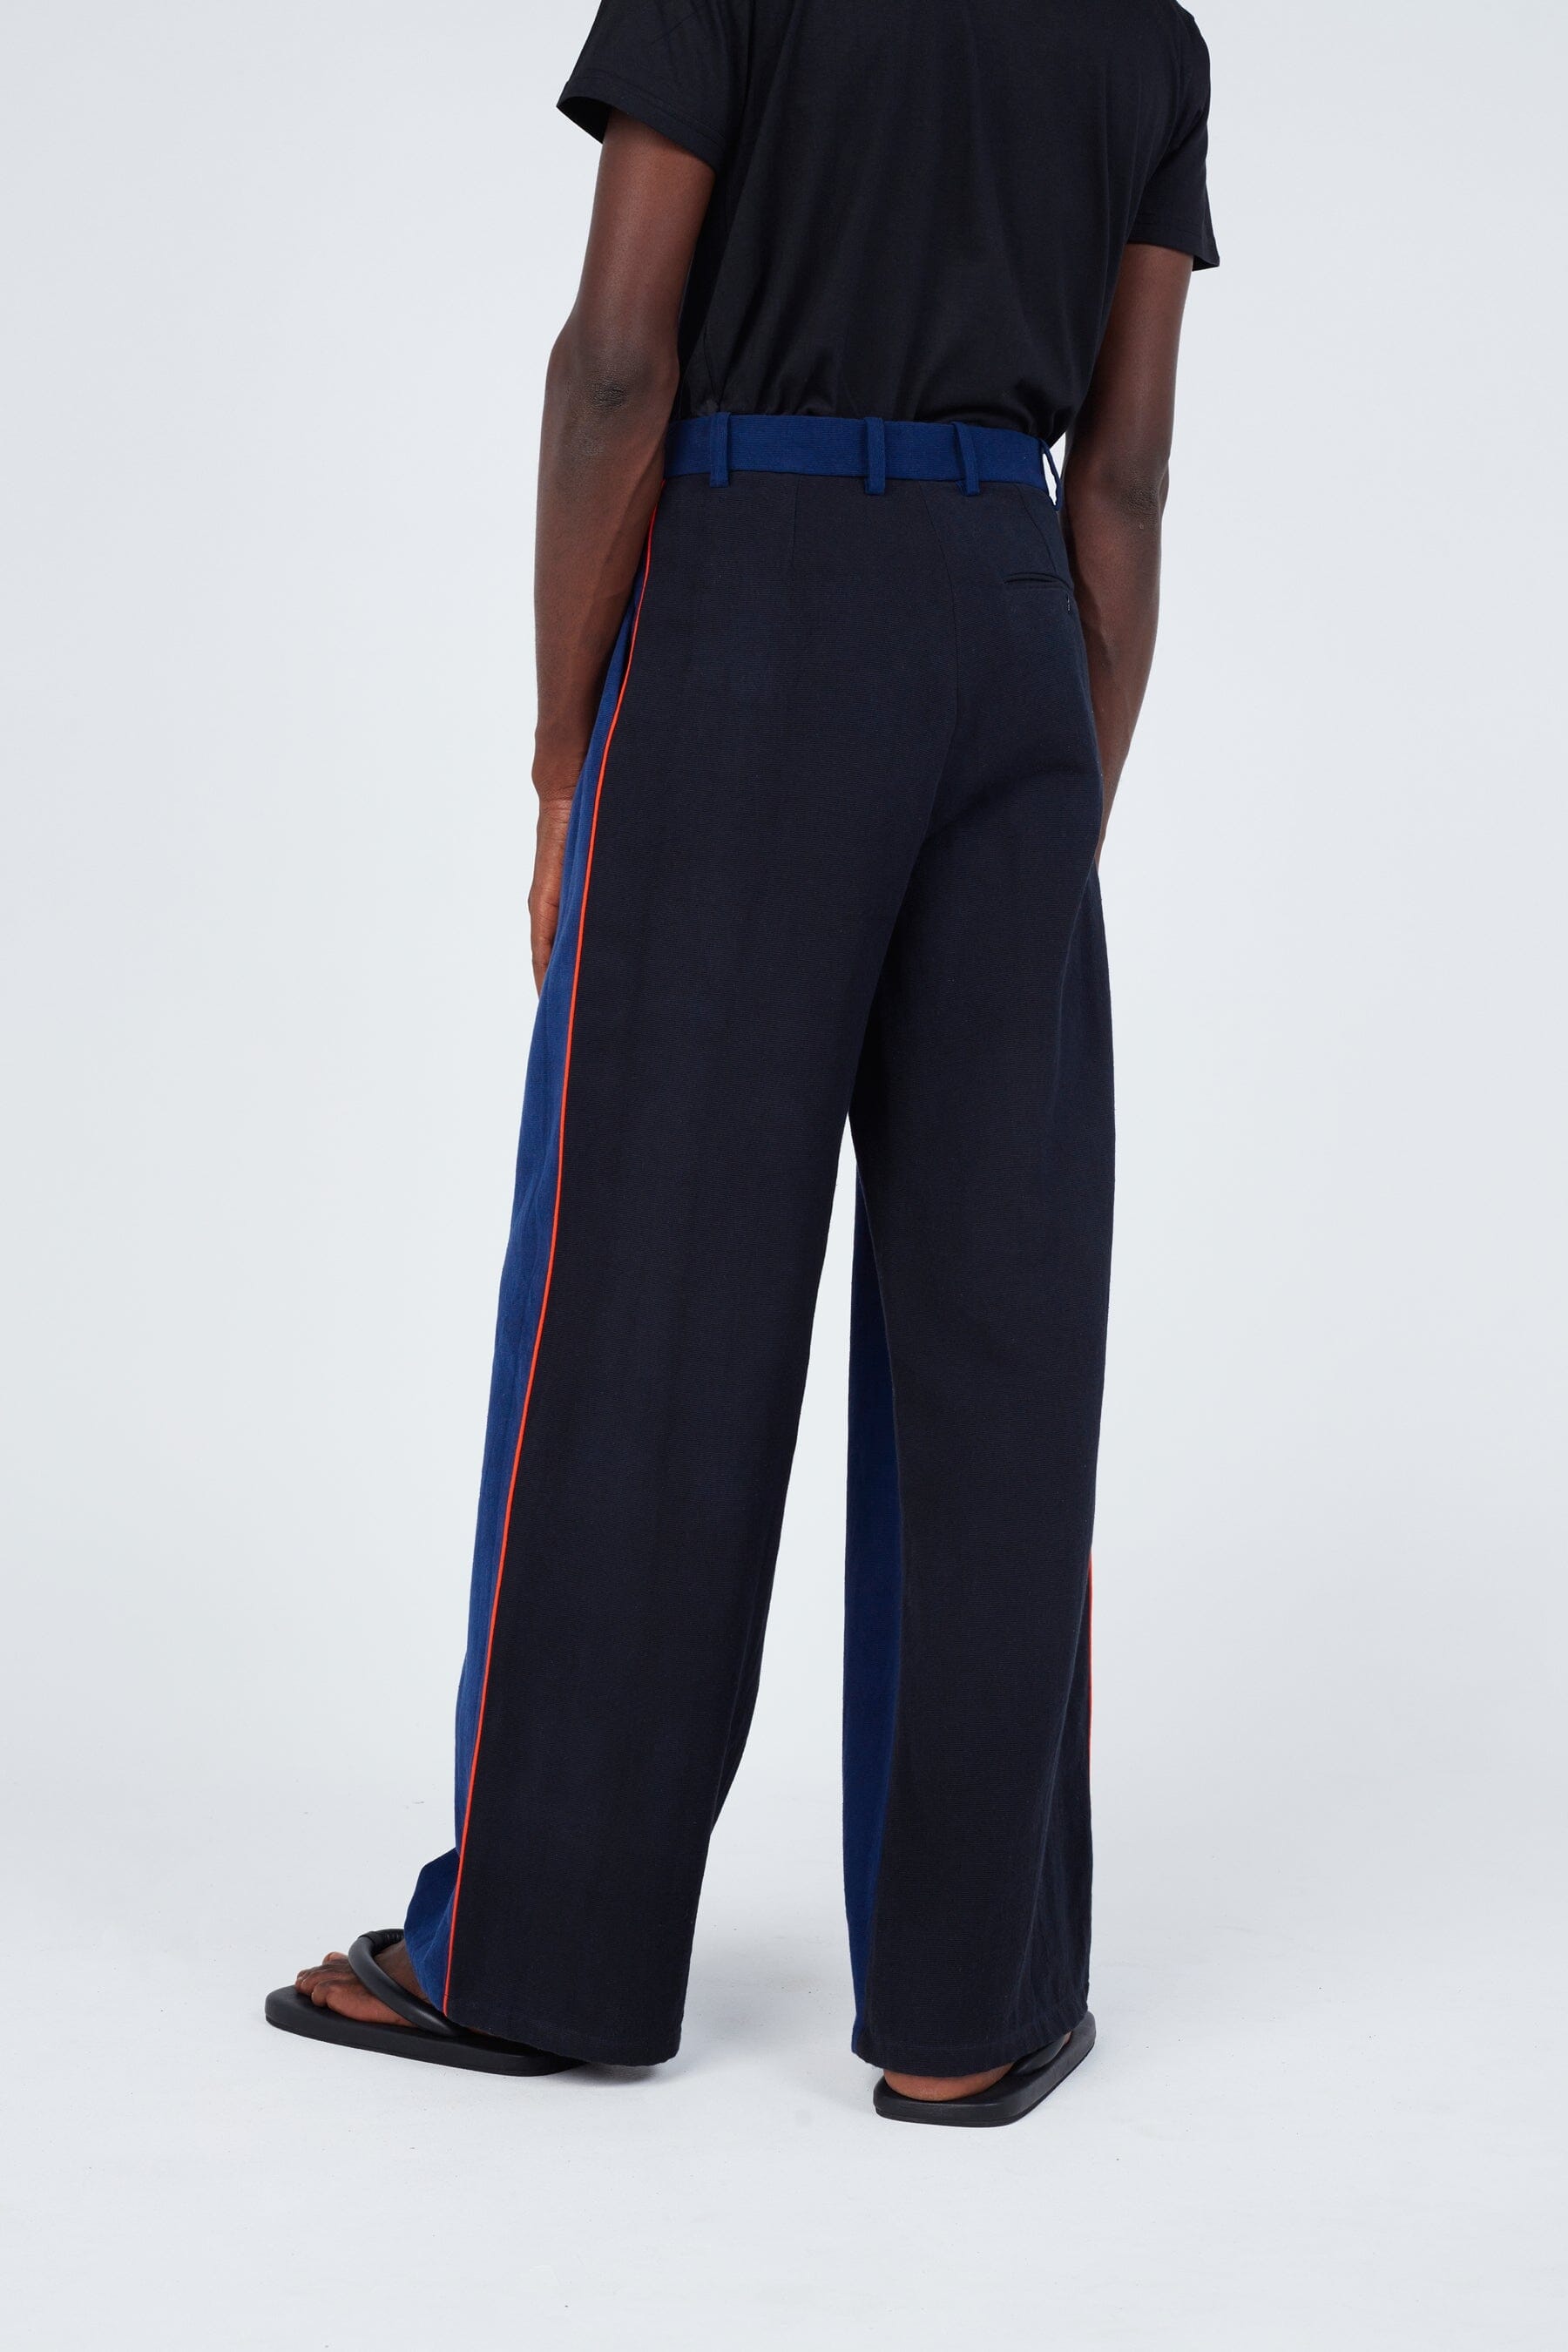 Stripe Seam Classic Wide Pants • Bi-colour Trousers New LaurenceAirline 